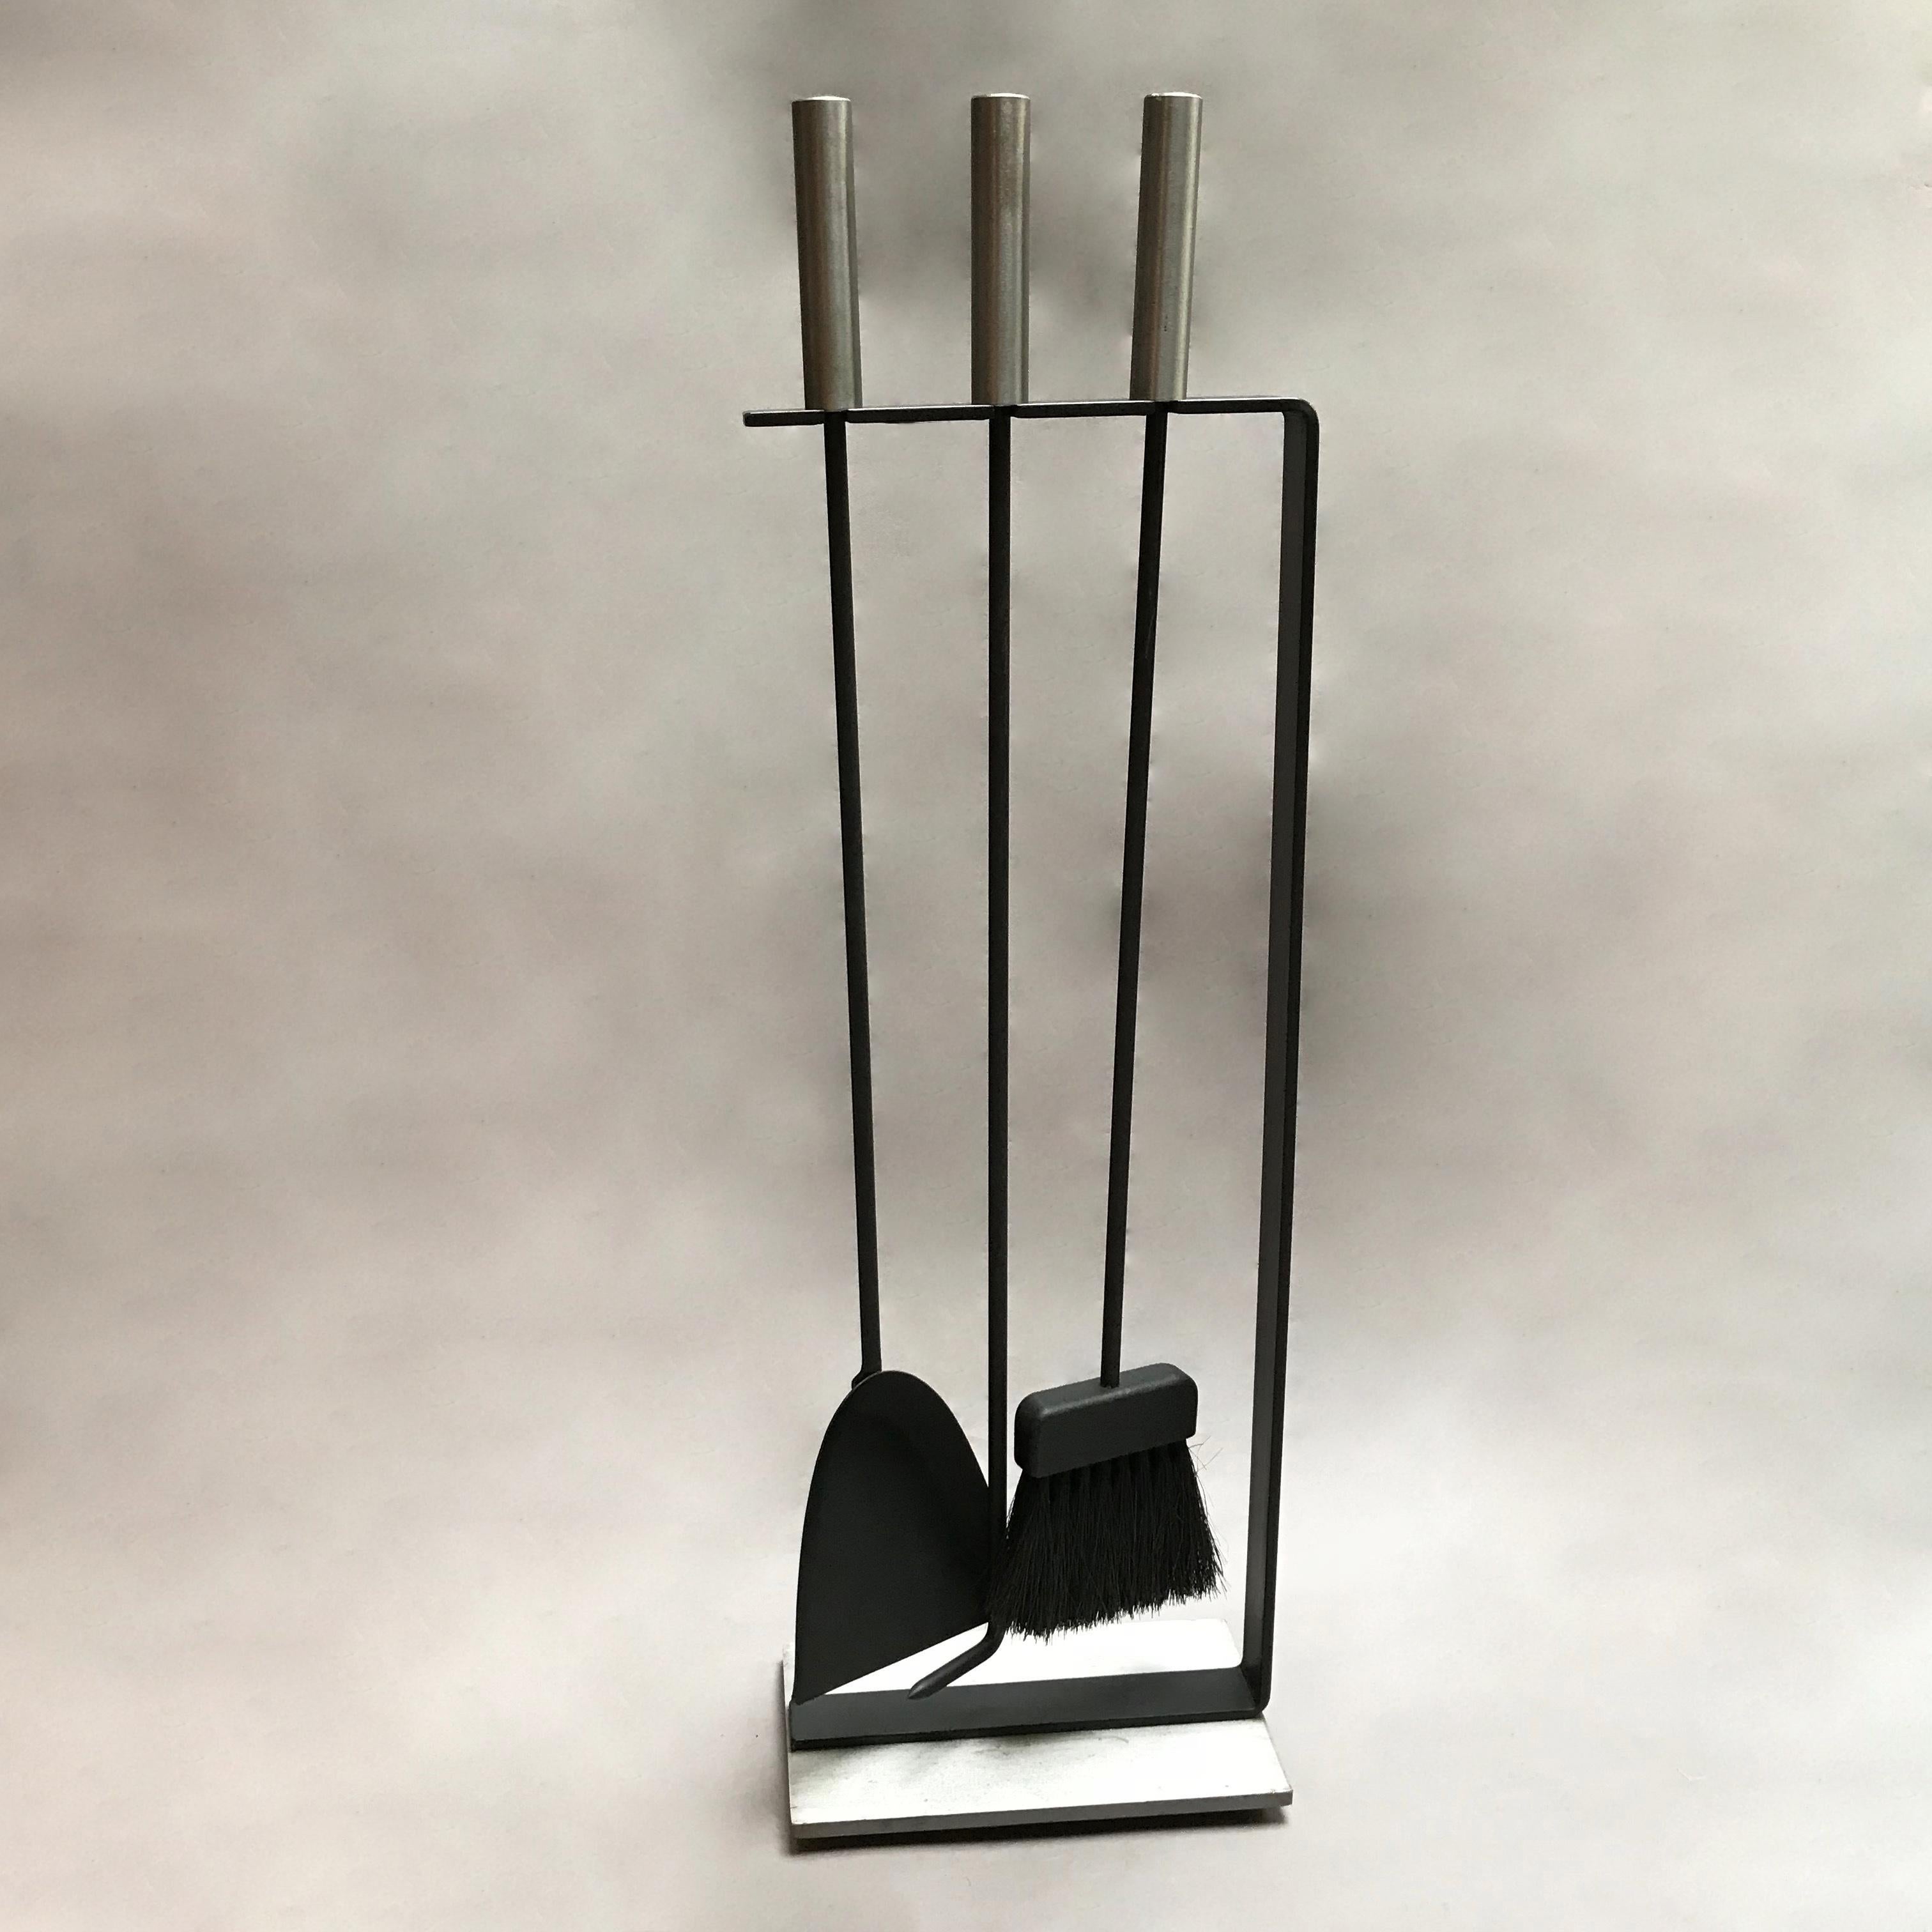 Modernist, wrought iron, fireplace tool set by Pilgrim attributed to George Nelson features 3 tools in a minimalist open frame with brushed chrome base and handles.